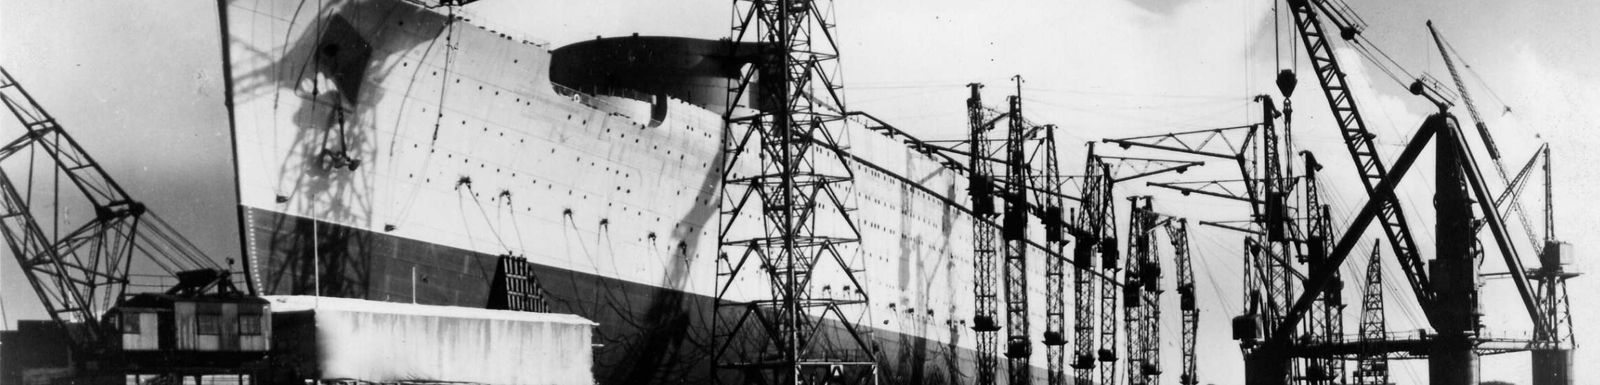 The building of the Queen Mary, image courtesy of The Mitchell Library/Culture & Sport Glasgow